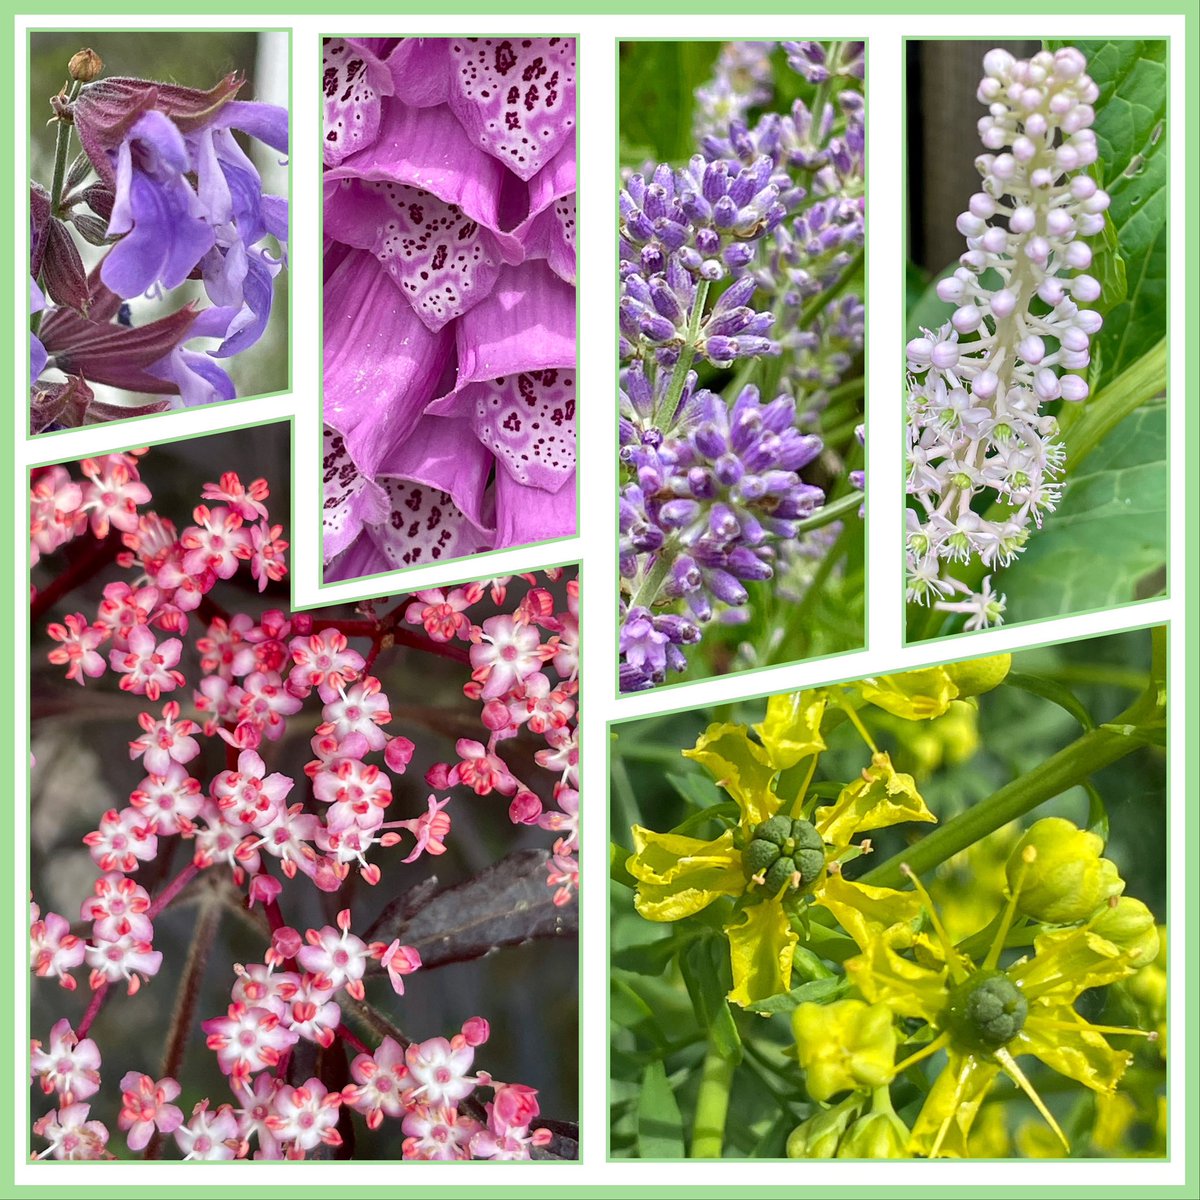 My #SixOnSaturday are from the fascinating #pharmacy of nature. While sage, lavender, elderberry (a cultivar called 'black lace') and Ruta graveolens can be used as home remedies, red foxglove and Phytolacca are toxic and require professional processing and application!🧙